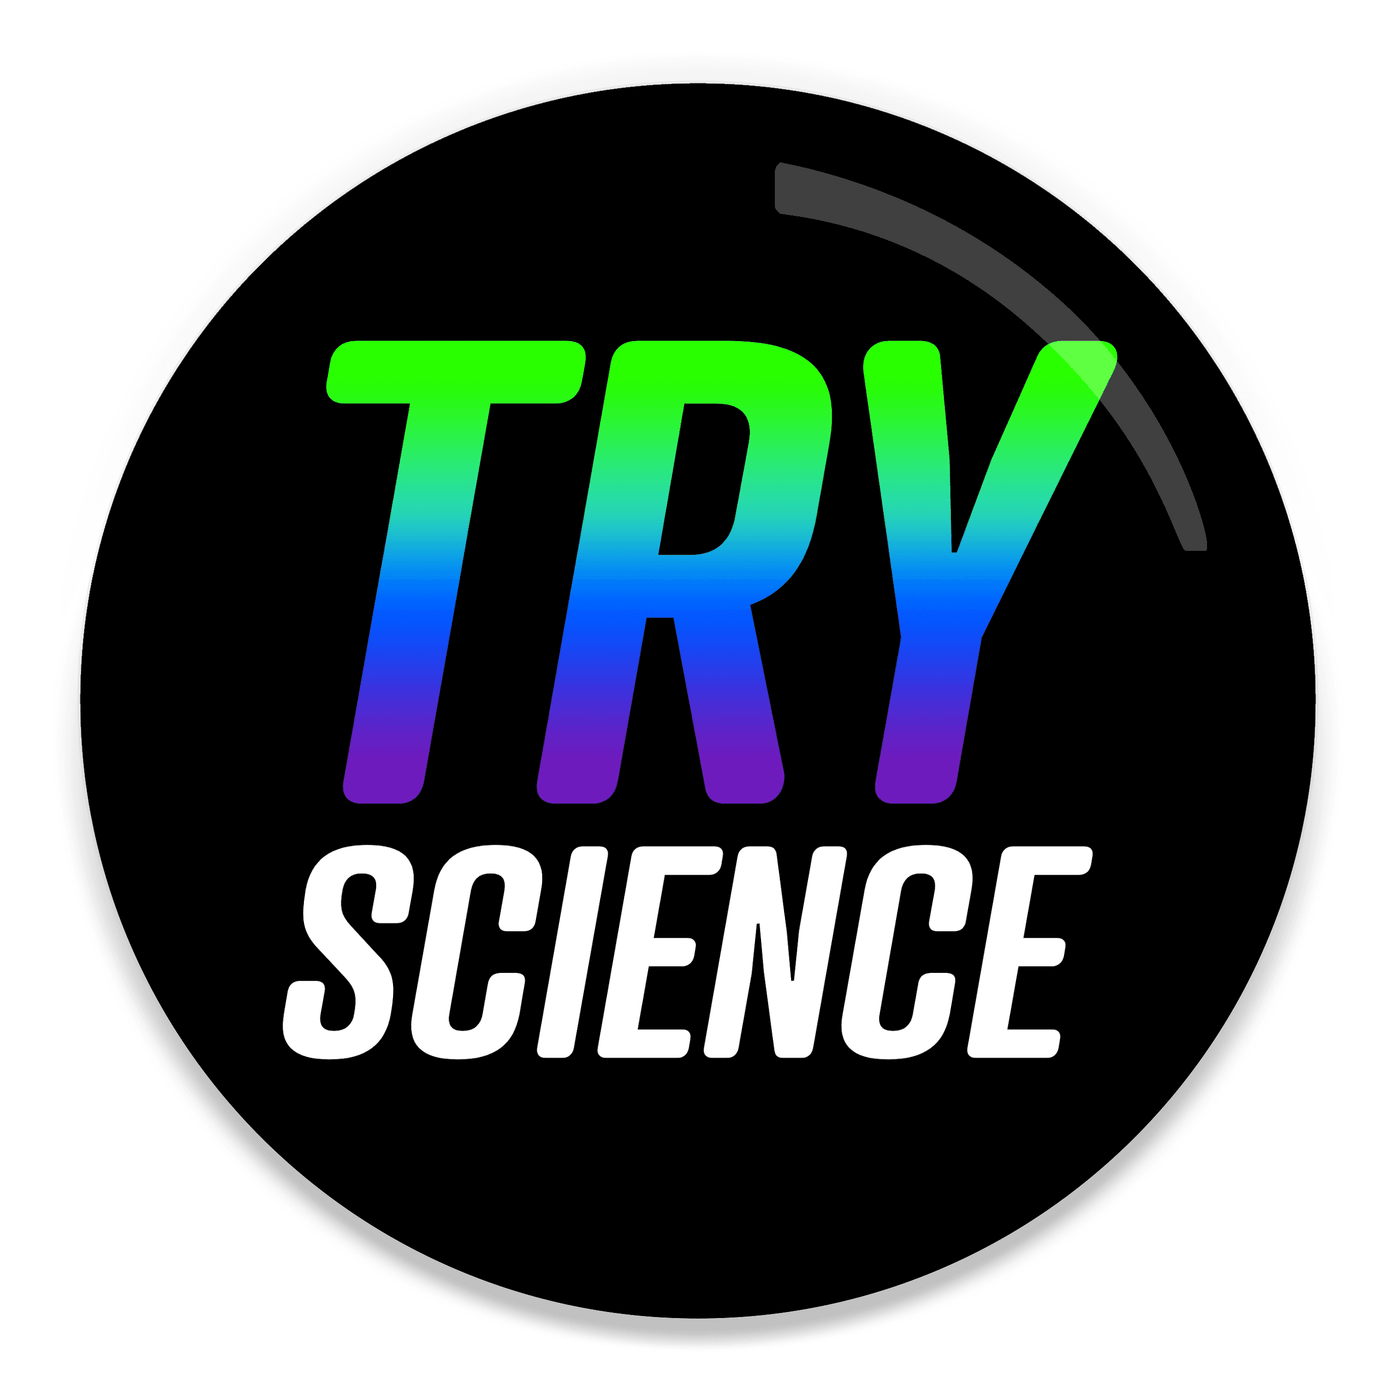 2.25 inch round colorful magnet with image of text that says try science